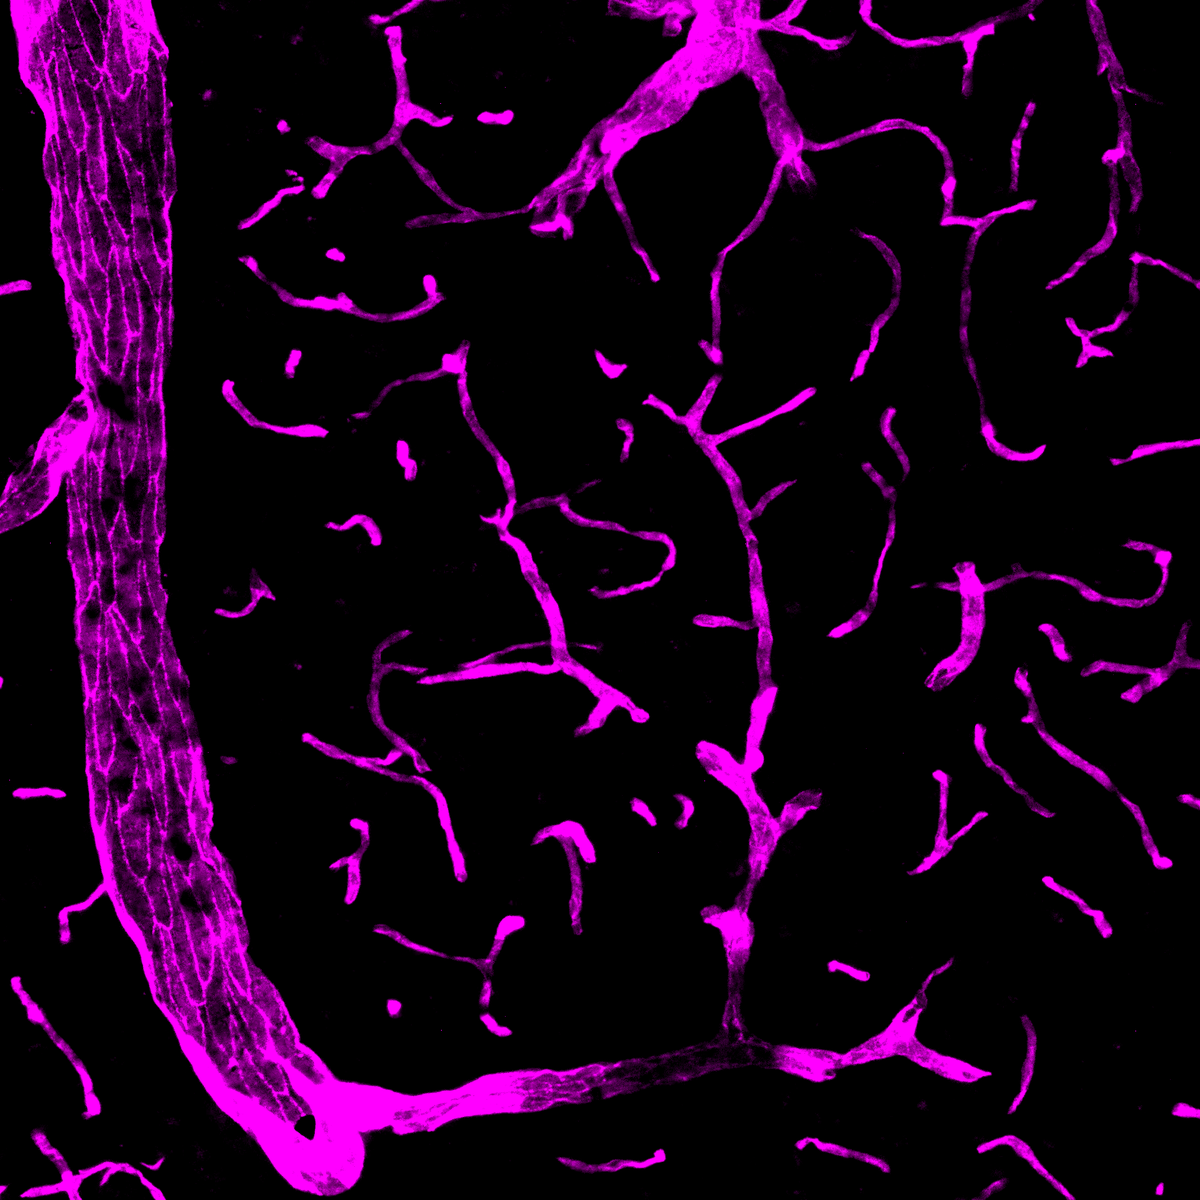 Absolutely blown away by this image, capturing an entire capillary bed 🧠🔬 revealing the intricate vascular network supporting brain function 🌐 
The brain is a masterpiece of complexity! 🐭💫 #Neuroscience #FluorescenceFriday  #Immunohistochemistry #ScienceIsBeautiful